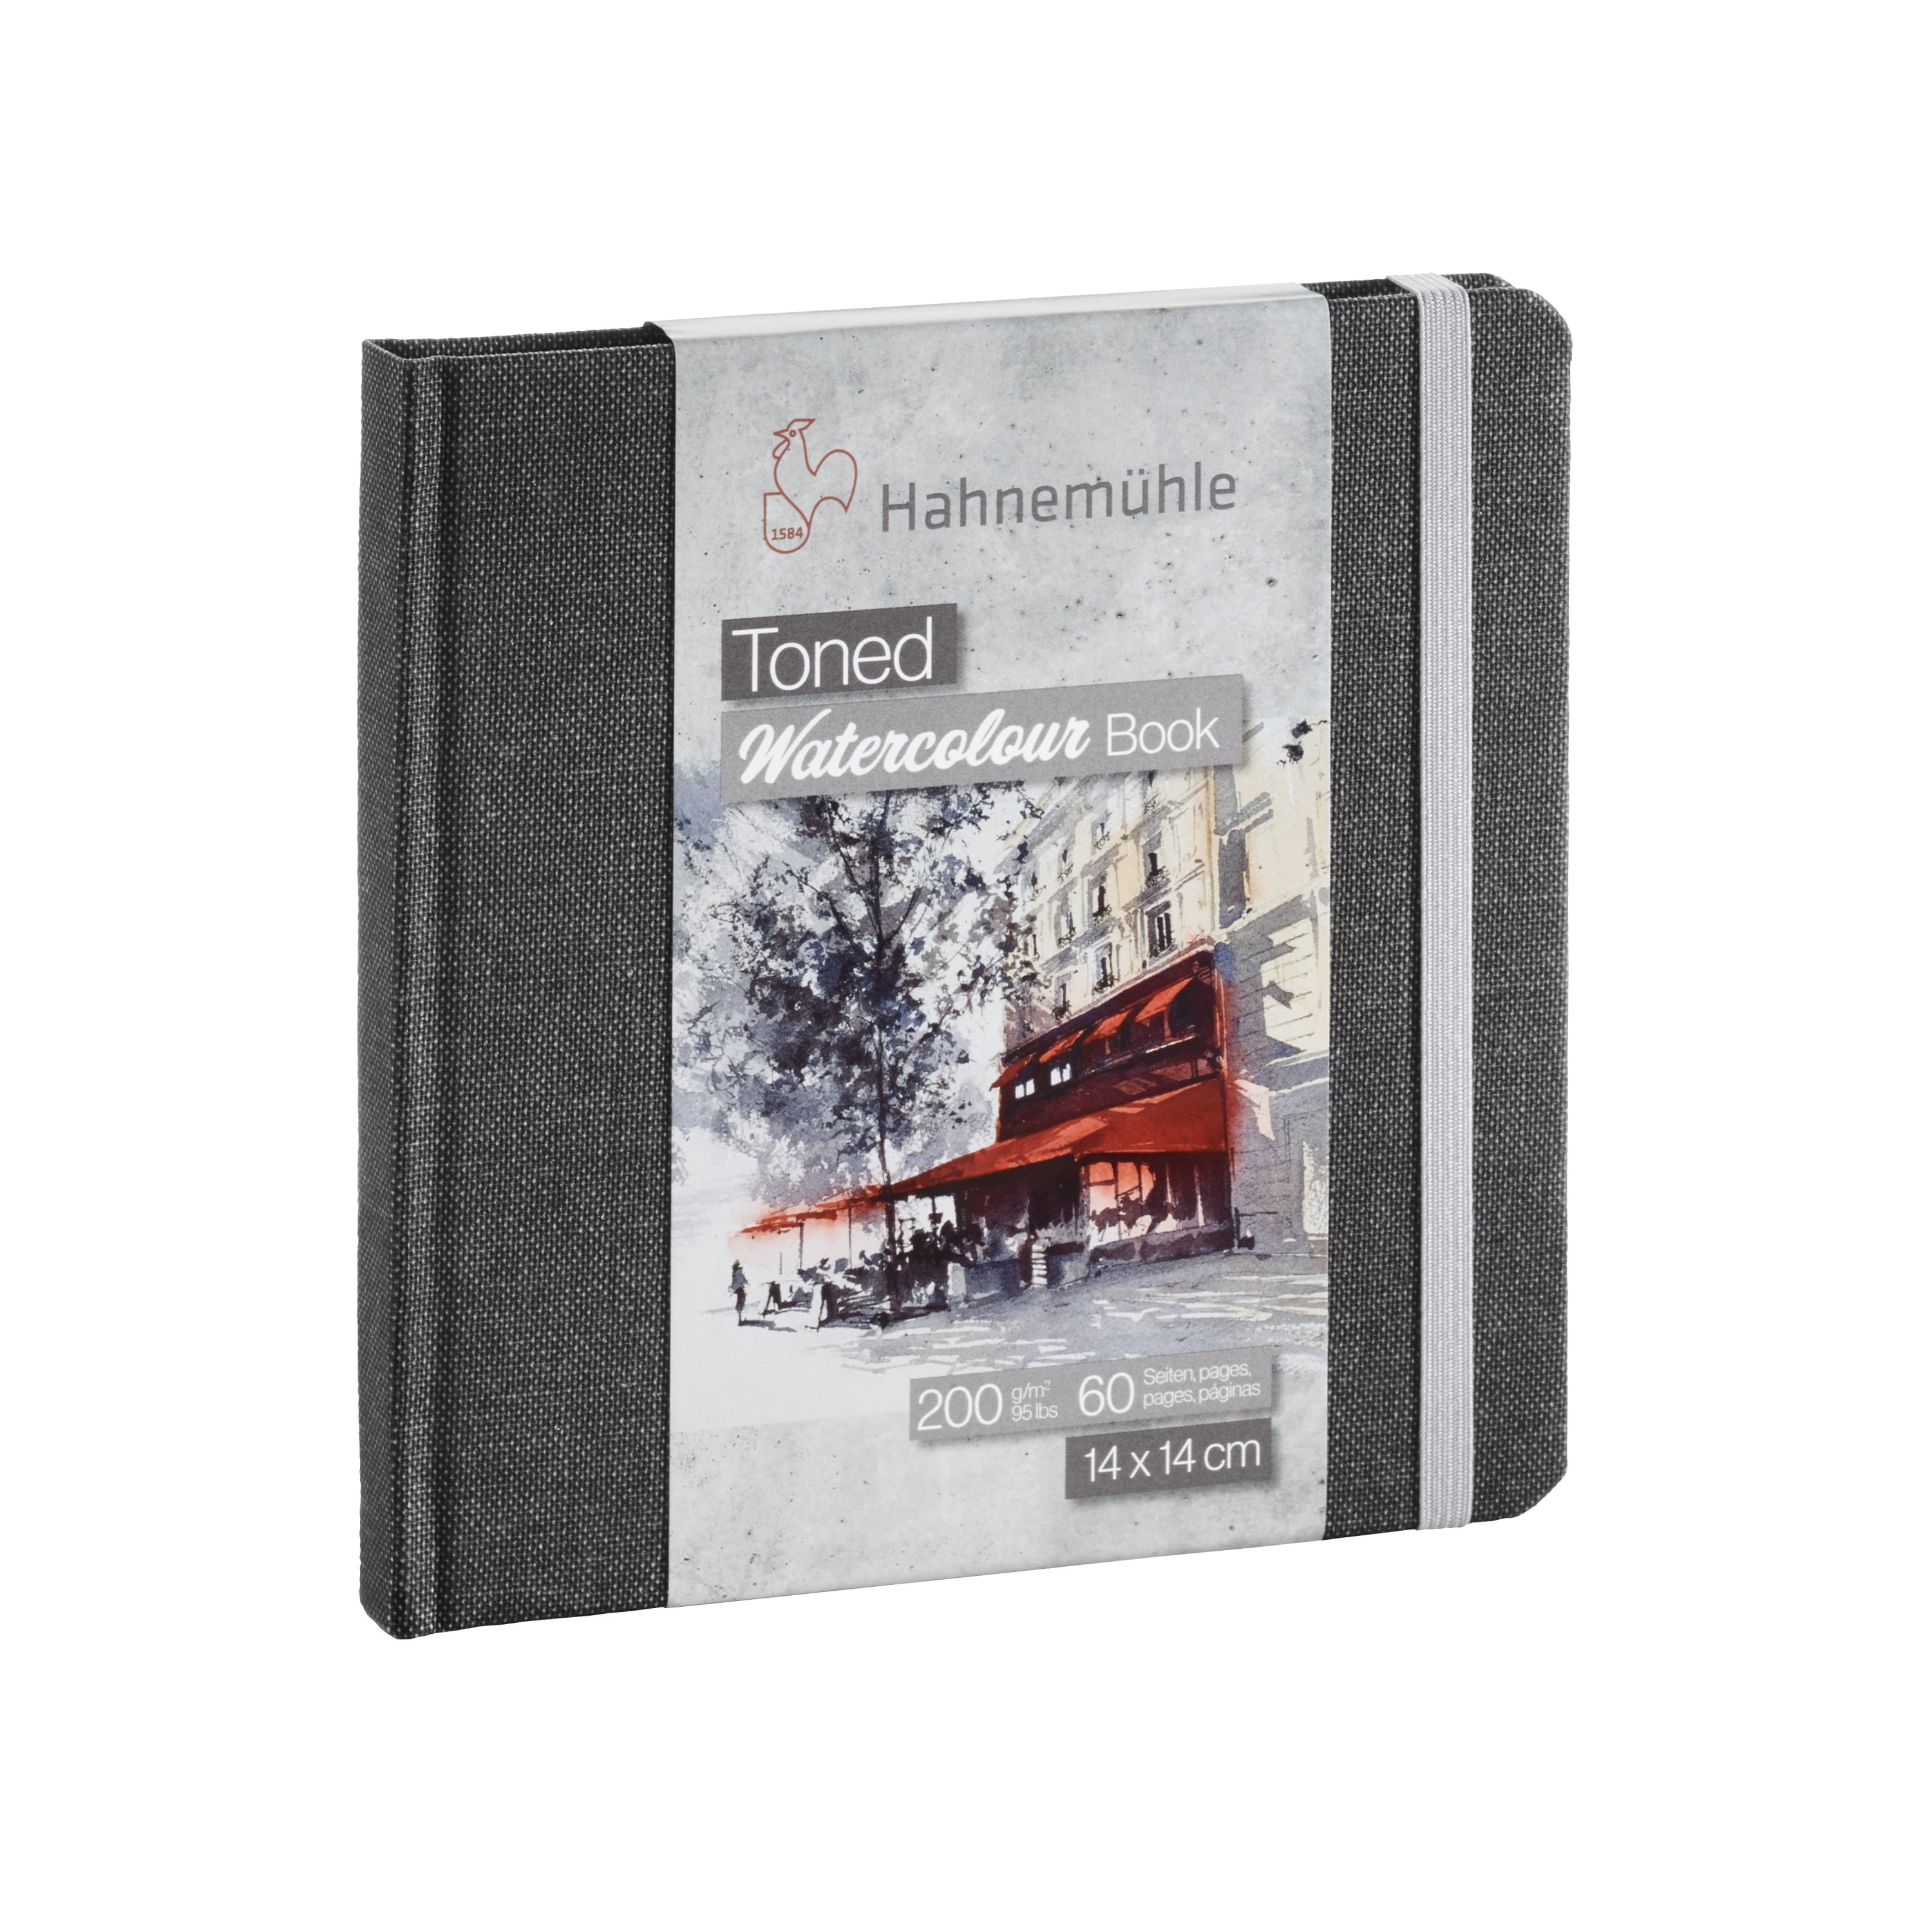 Hahnemuhle Toned Grey Watercolor Book 5.5x5.5